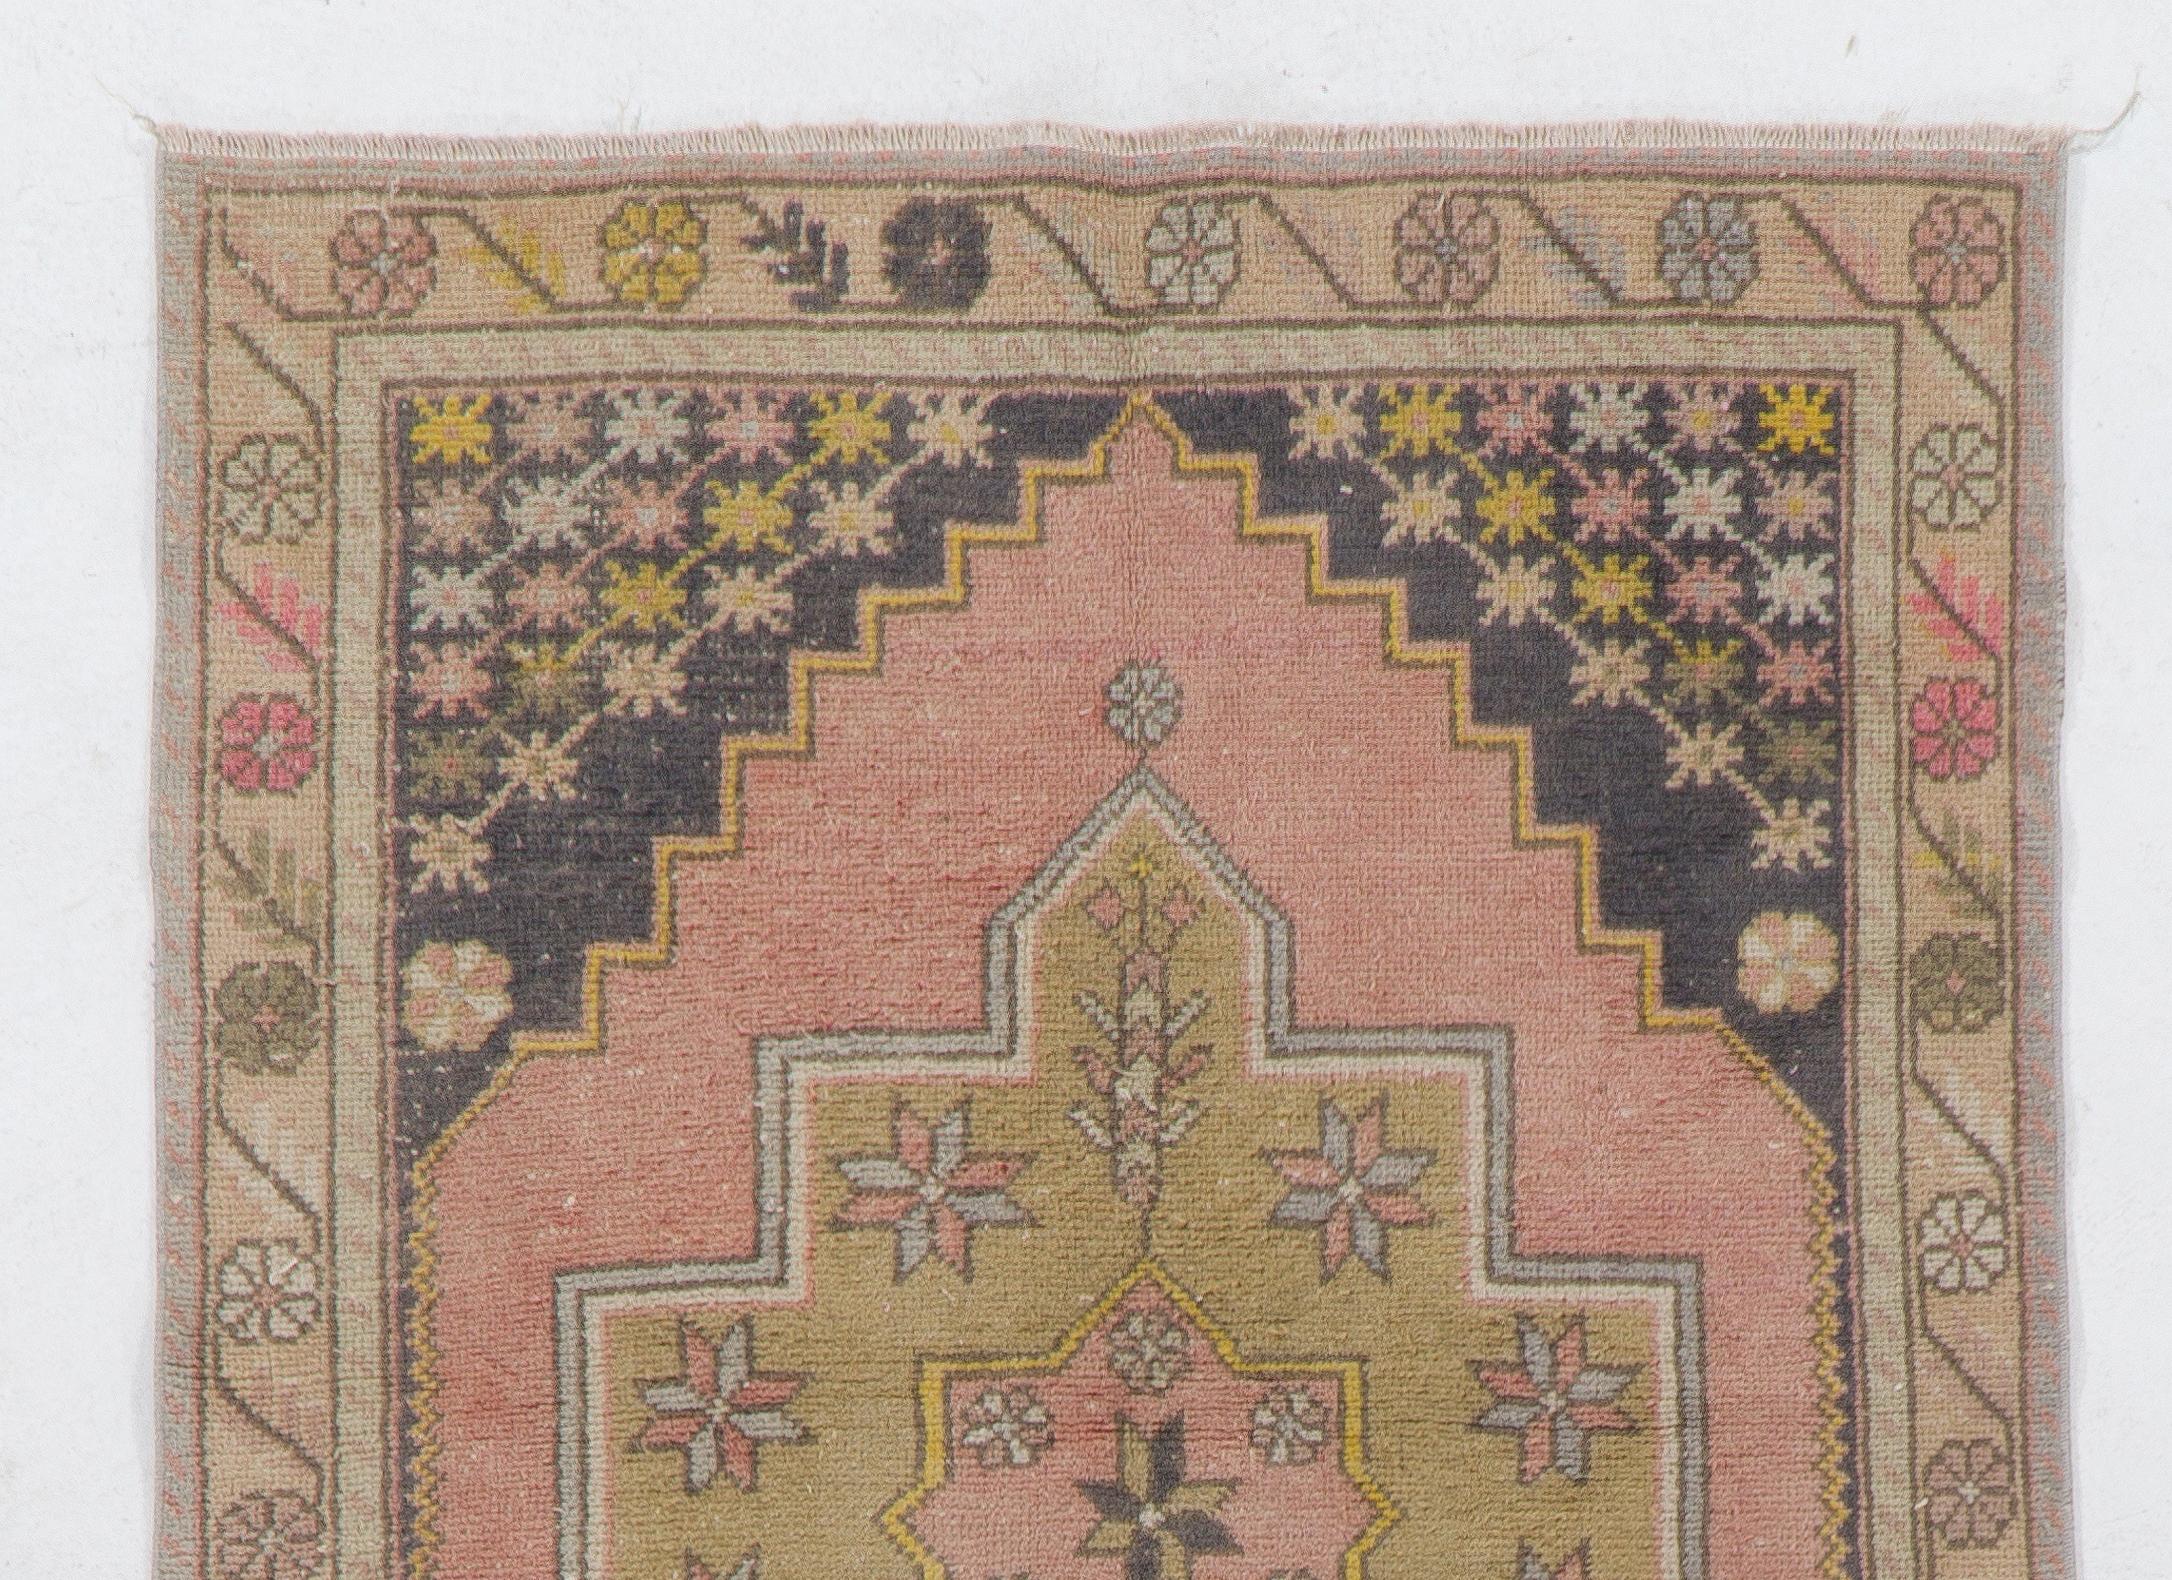 This vintage area rug was hand-knotted in Turkey in the 1950s. It features a geometric medallion at the centre of two nested lozenge-shaped areas within a field in faded red and faded black colors featuring tassel-like motifs on their borders. The